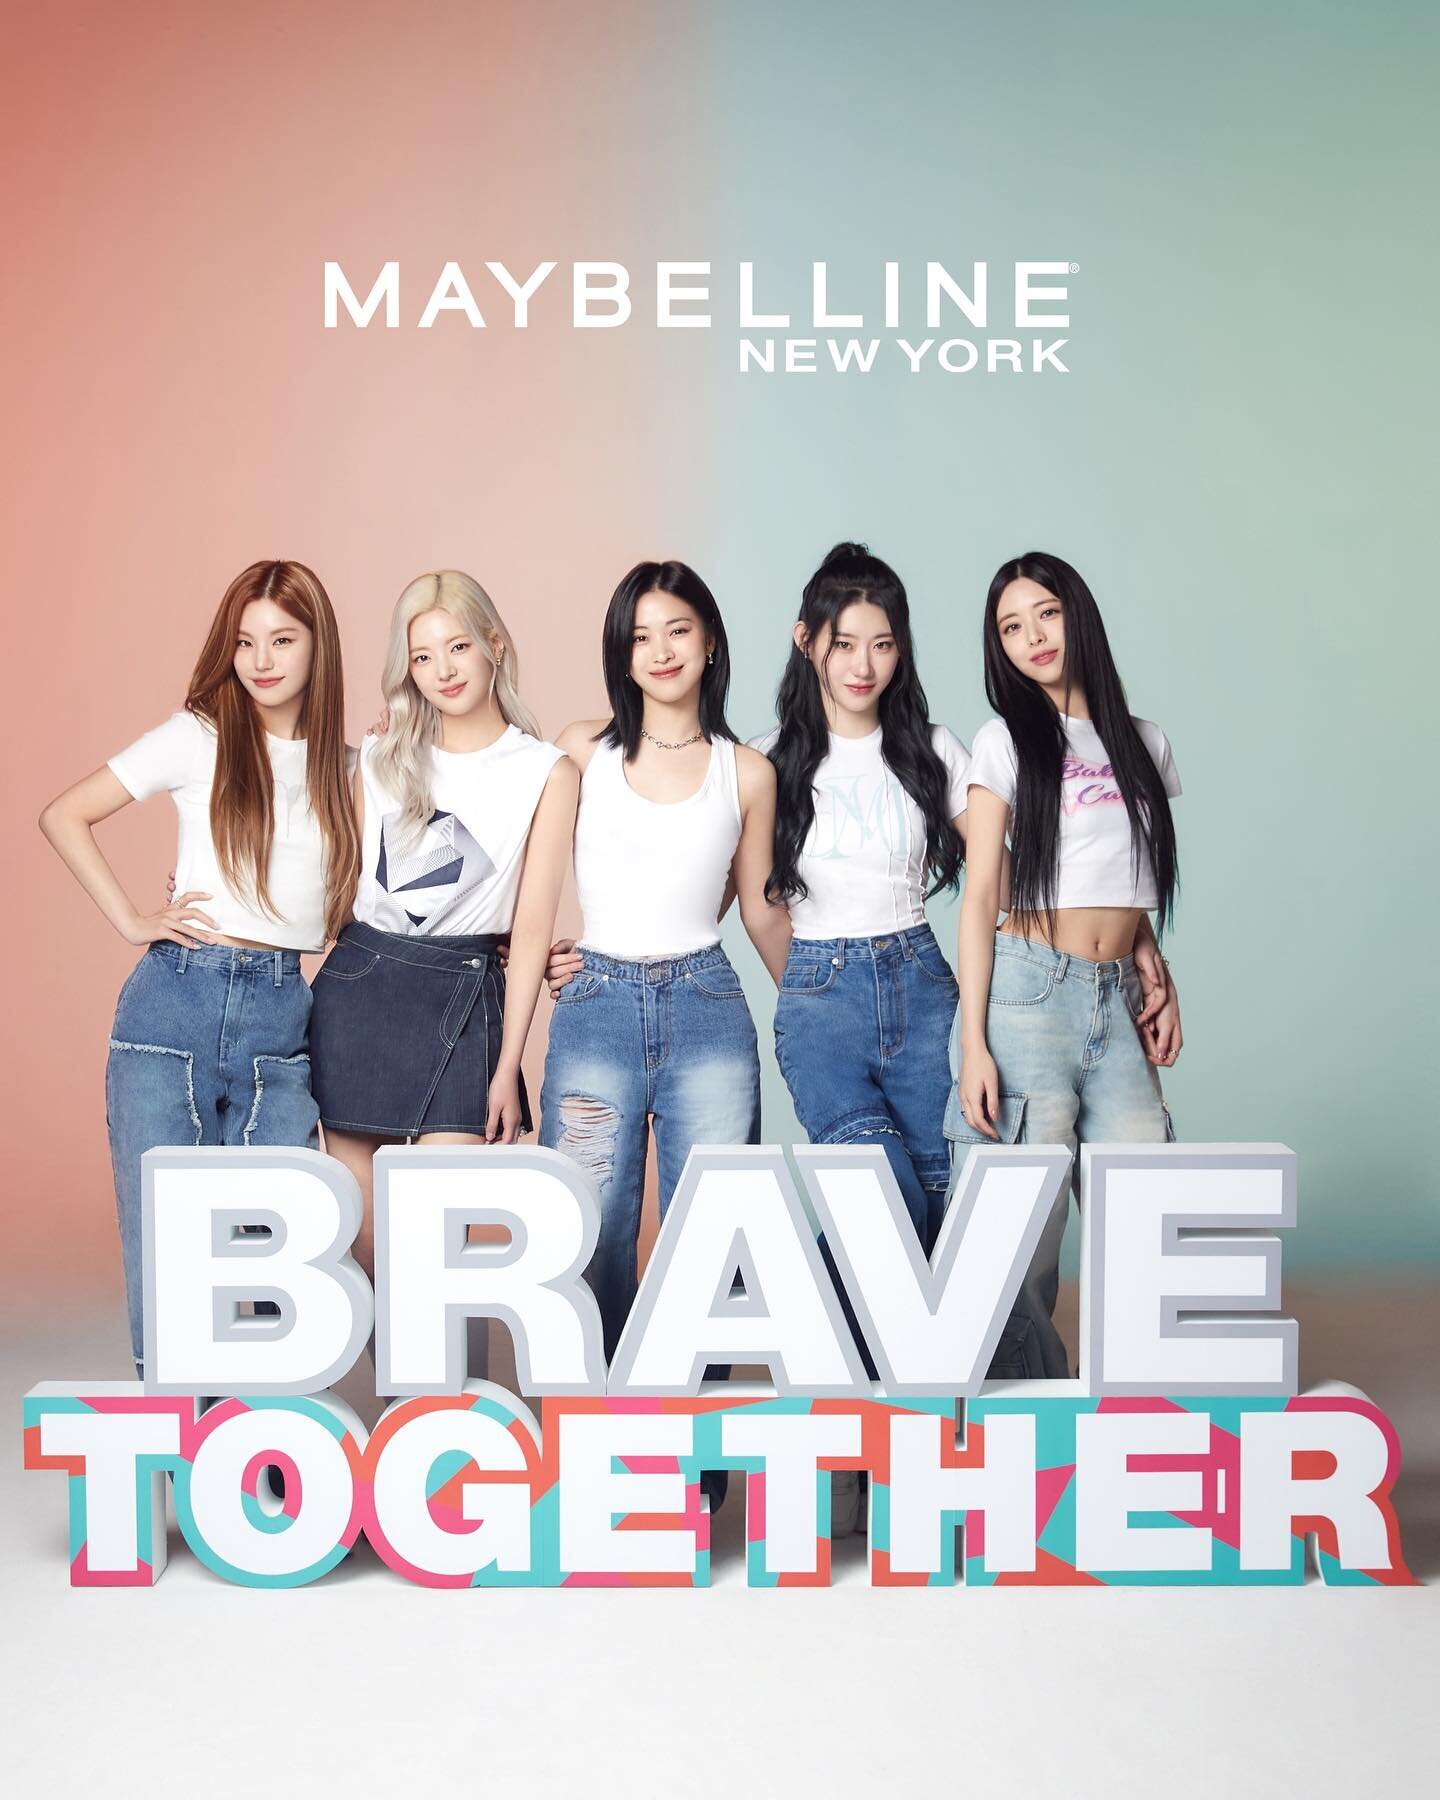 231005 - Maybelline Instagram Update with ITZY - ITZY x MAYBELLINE